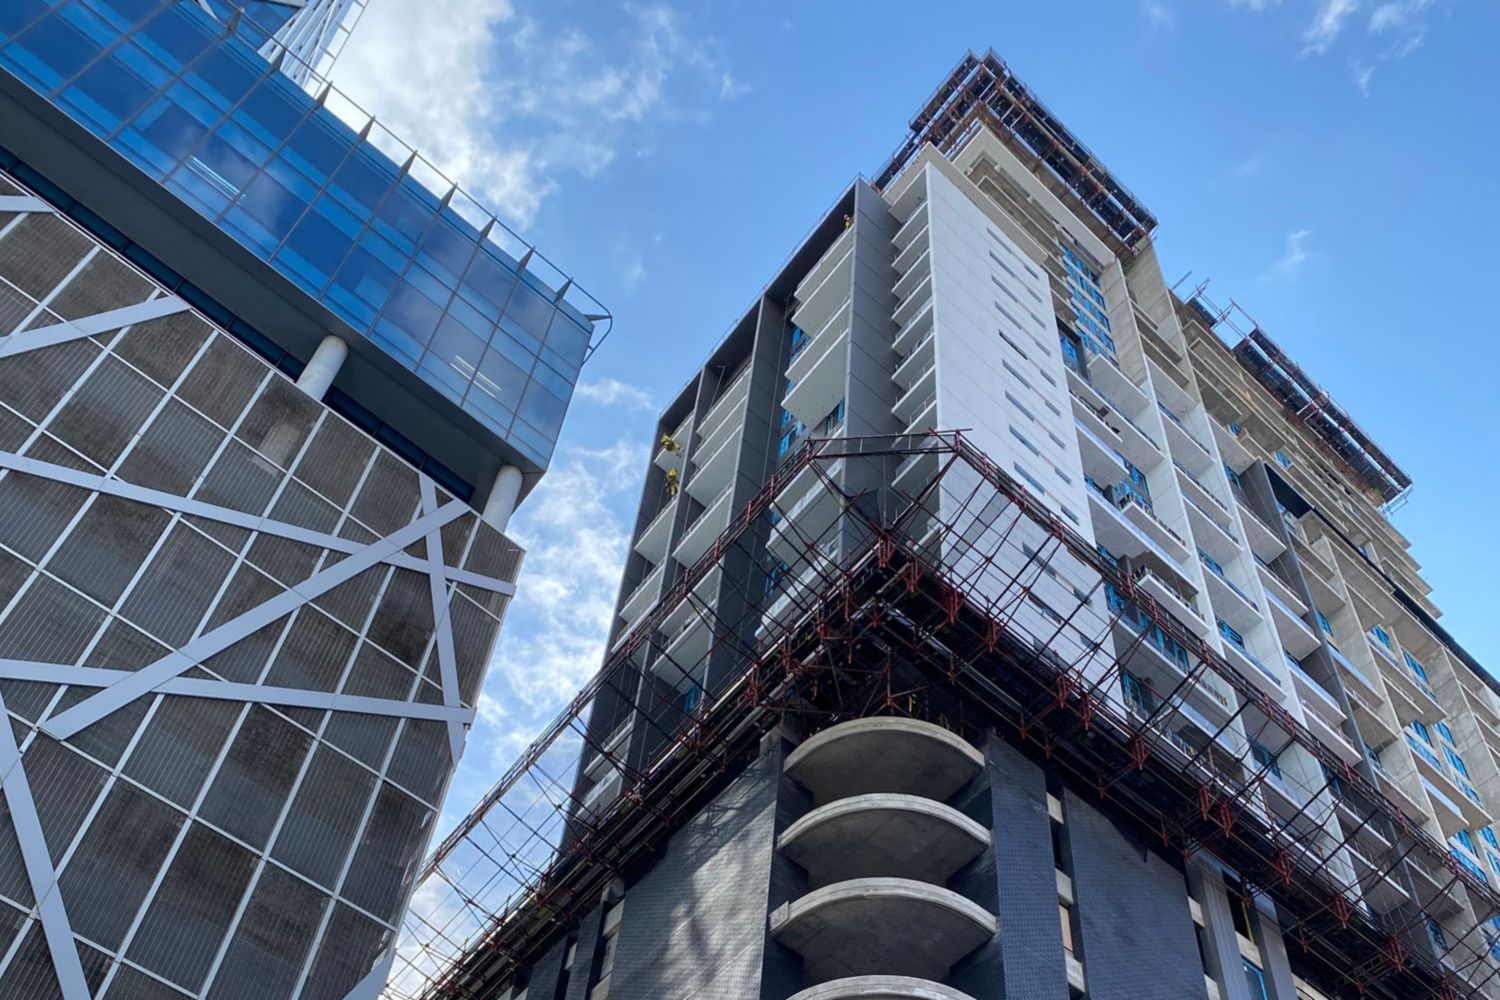 Sika products specified for concrete repair, structural strengthening, and crack bridging for the tallest building in Cape Town - 16 on Bree Street.